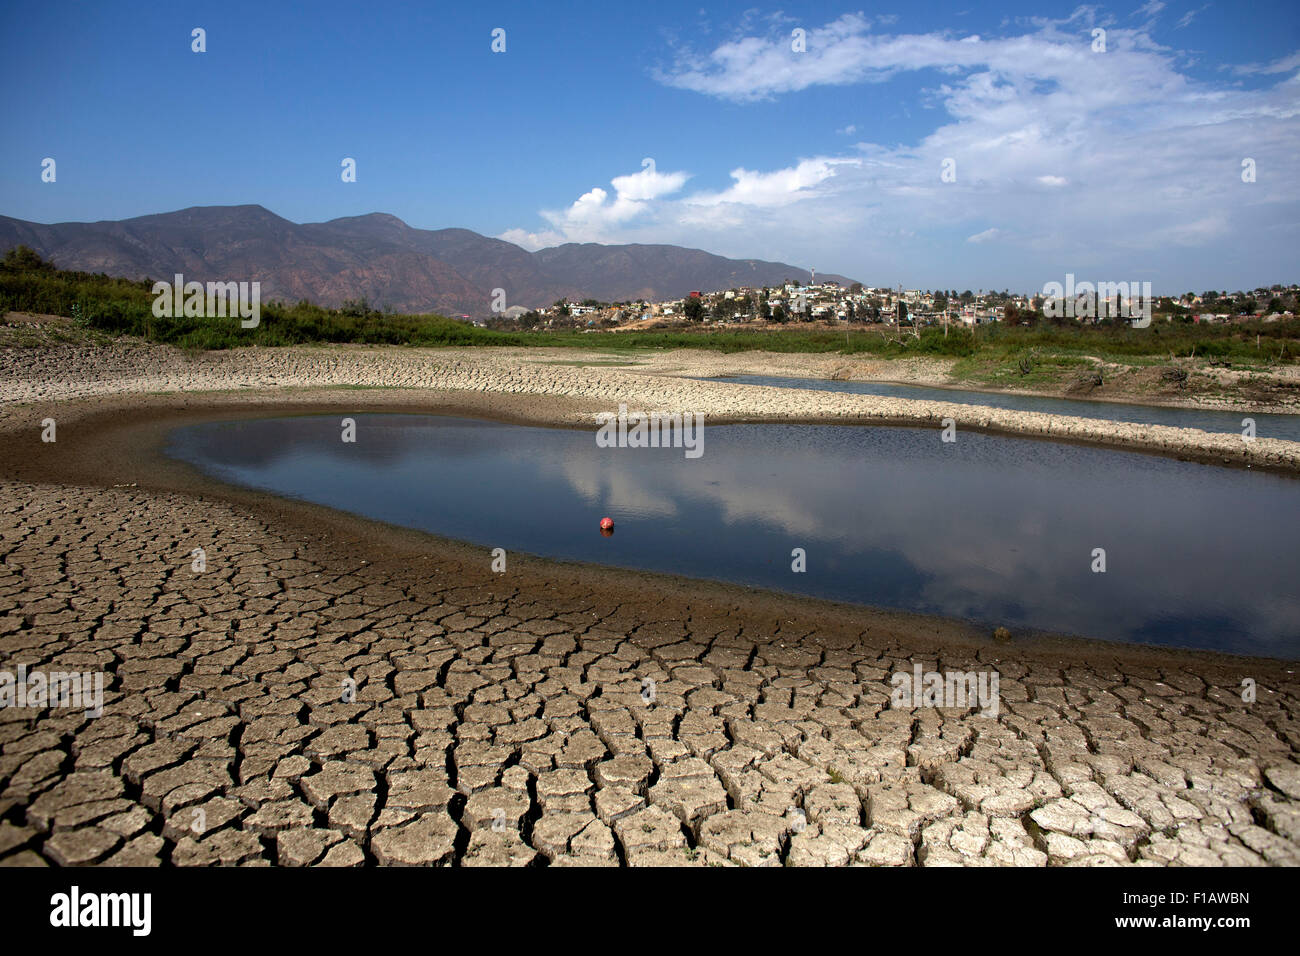 Ensenada. 28th Aug, 2015. Image taken on Aug. 28, 2015 shows the riverbed at the Emiliano Lopez Zamora Dam in Ensenada Municipality, northwest Mexico. The country's Baja California State, in particular the municipalities of Tijuana, Playas de Rosario and Ensenada, witnessed a severe drought. © Guillermo Arias/Xinhua/Alamy Live News Stock Photo